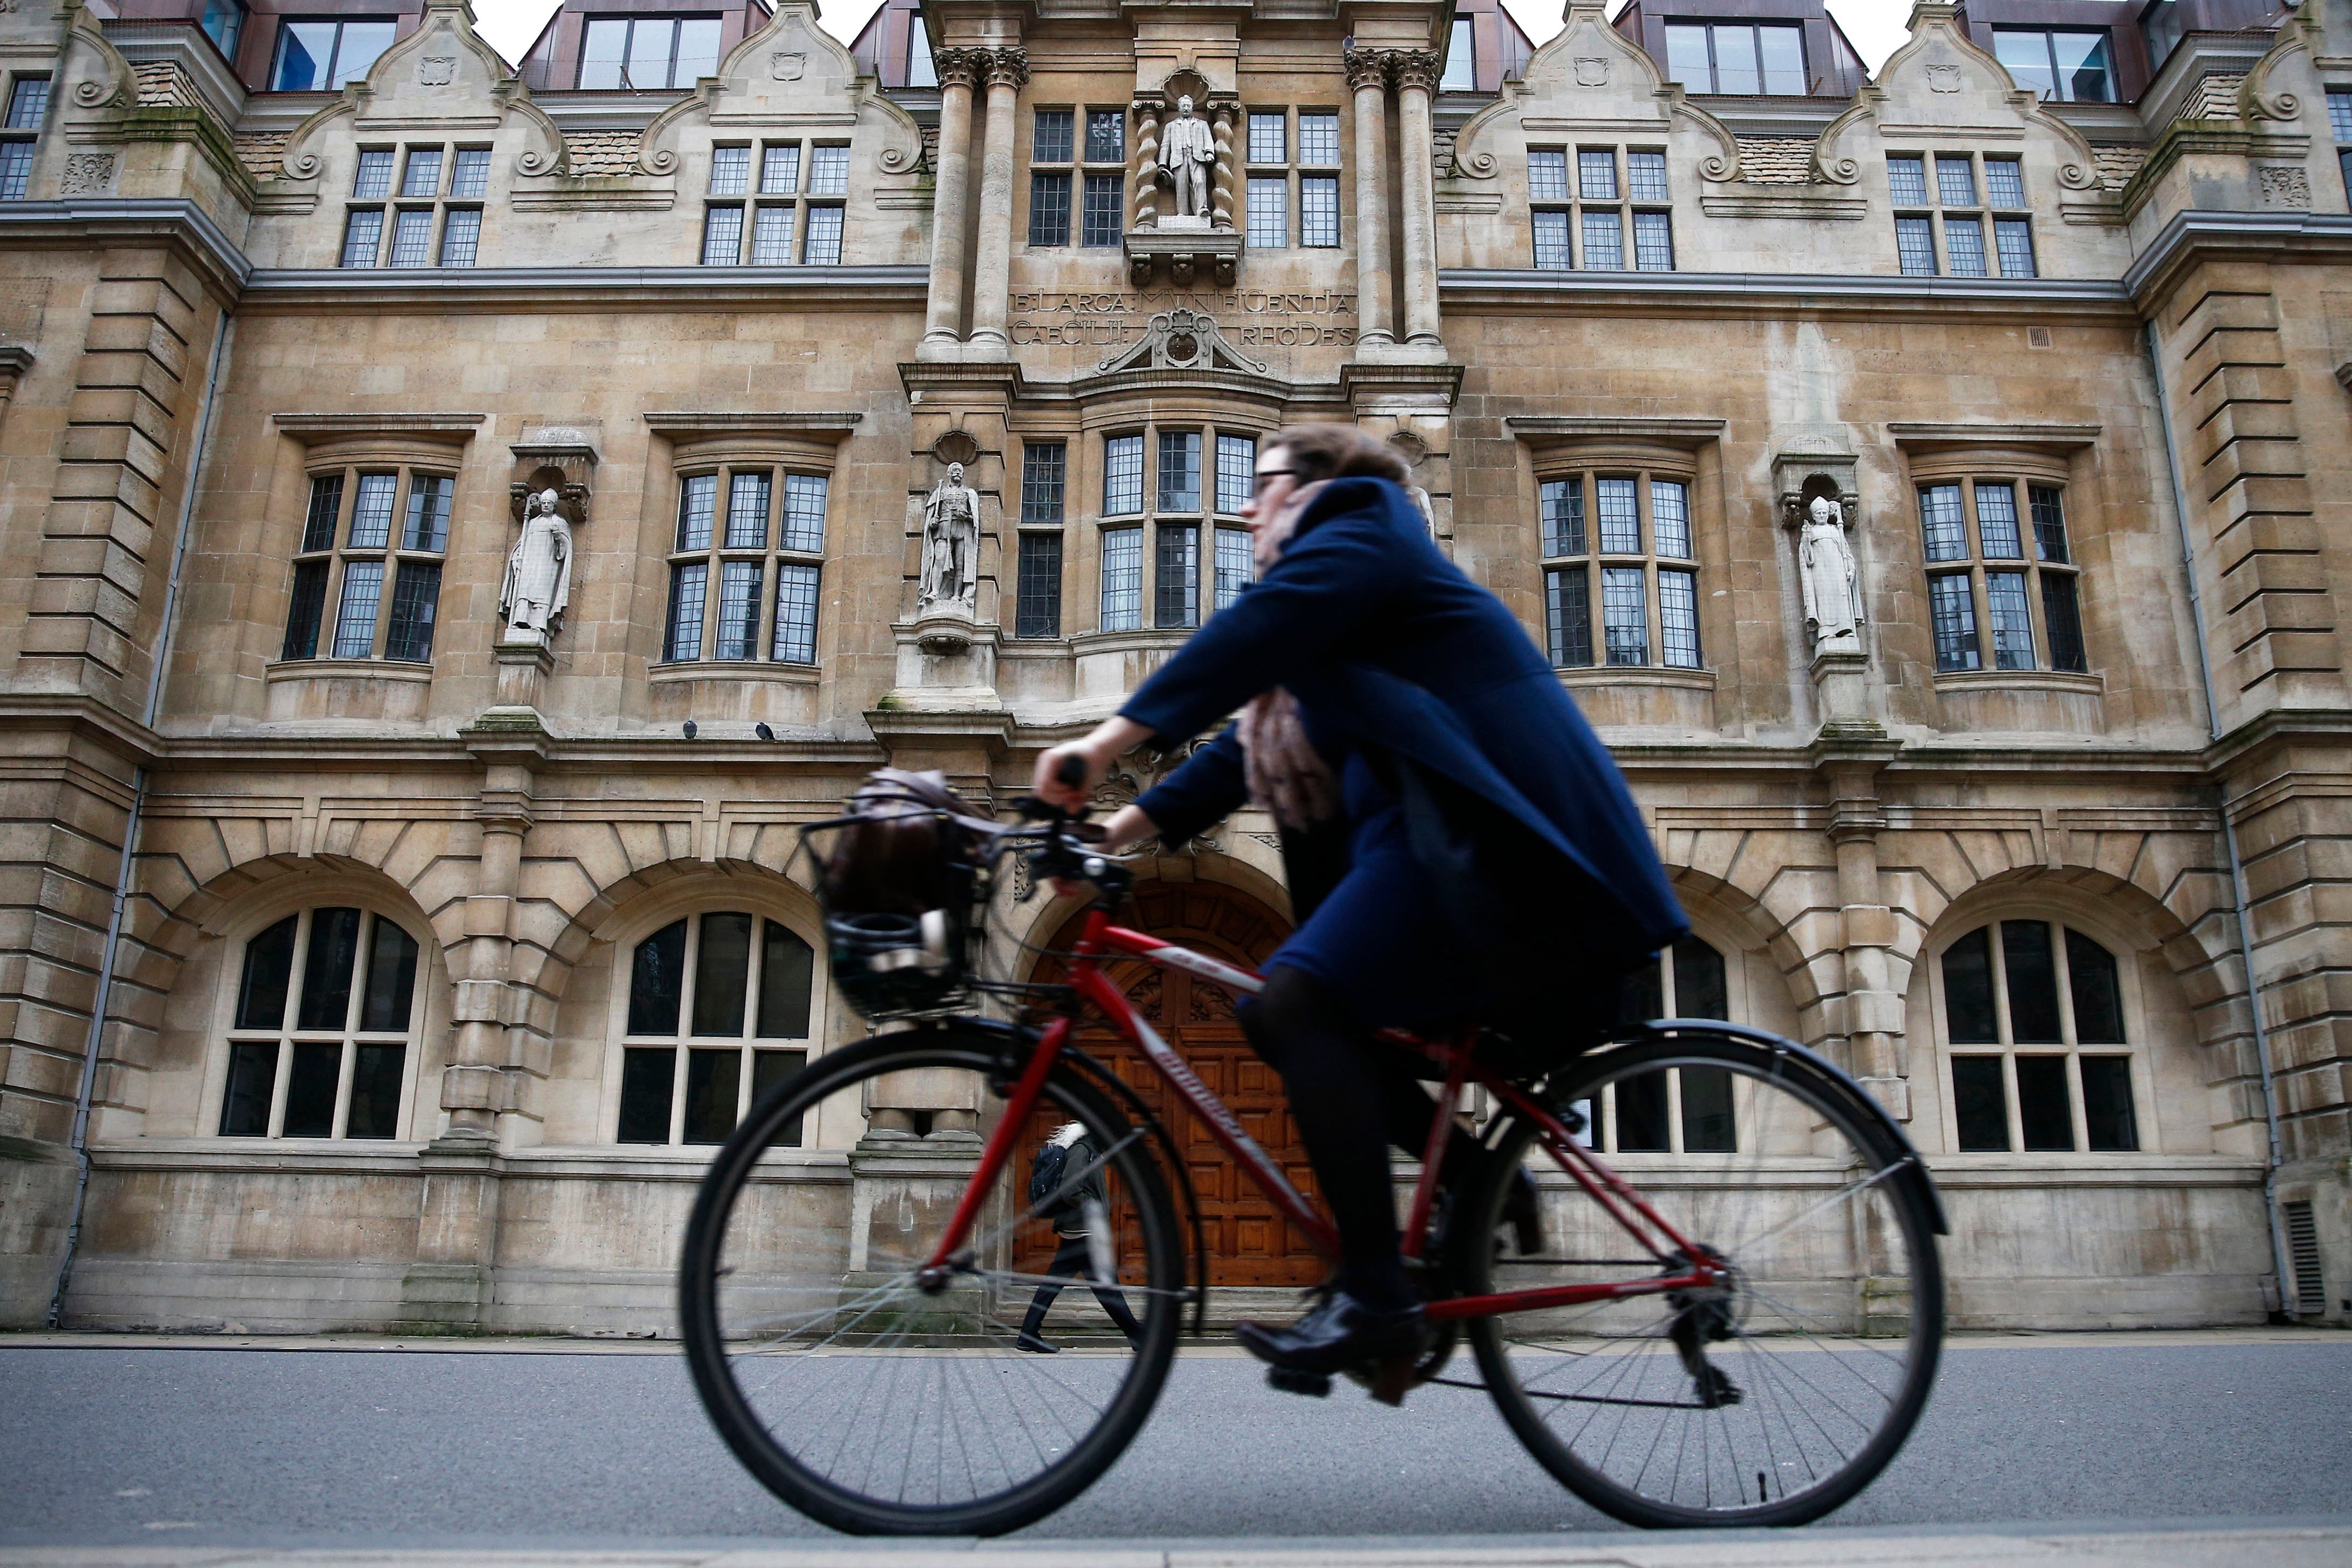 A woman bicycles in front of an old building in Oxford, England. She is wearing a blue coat.